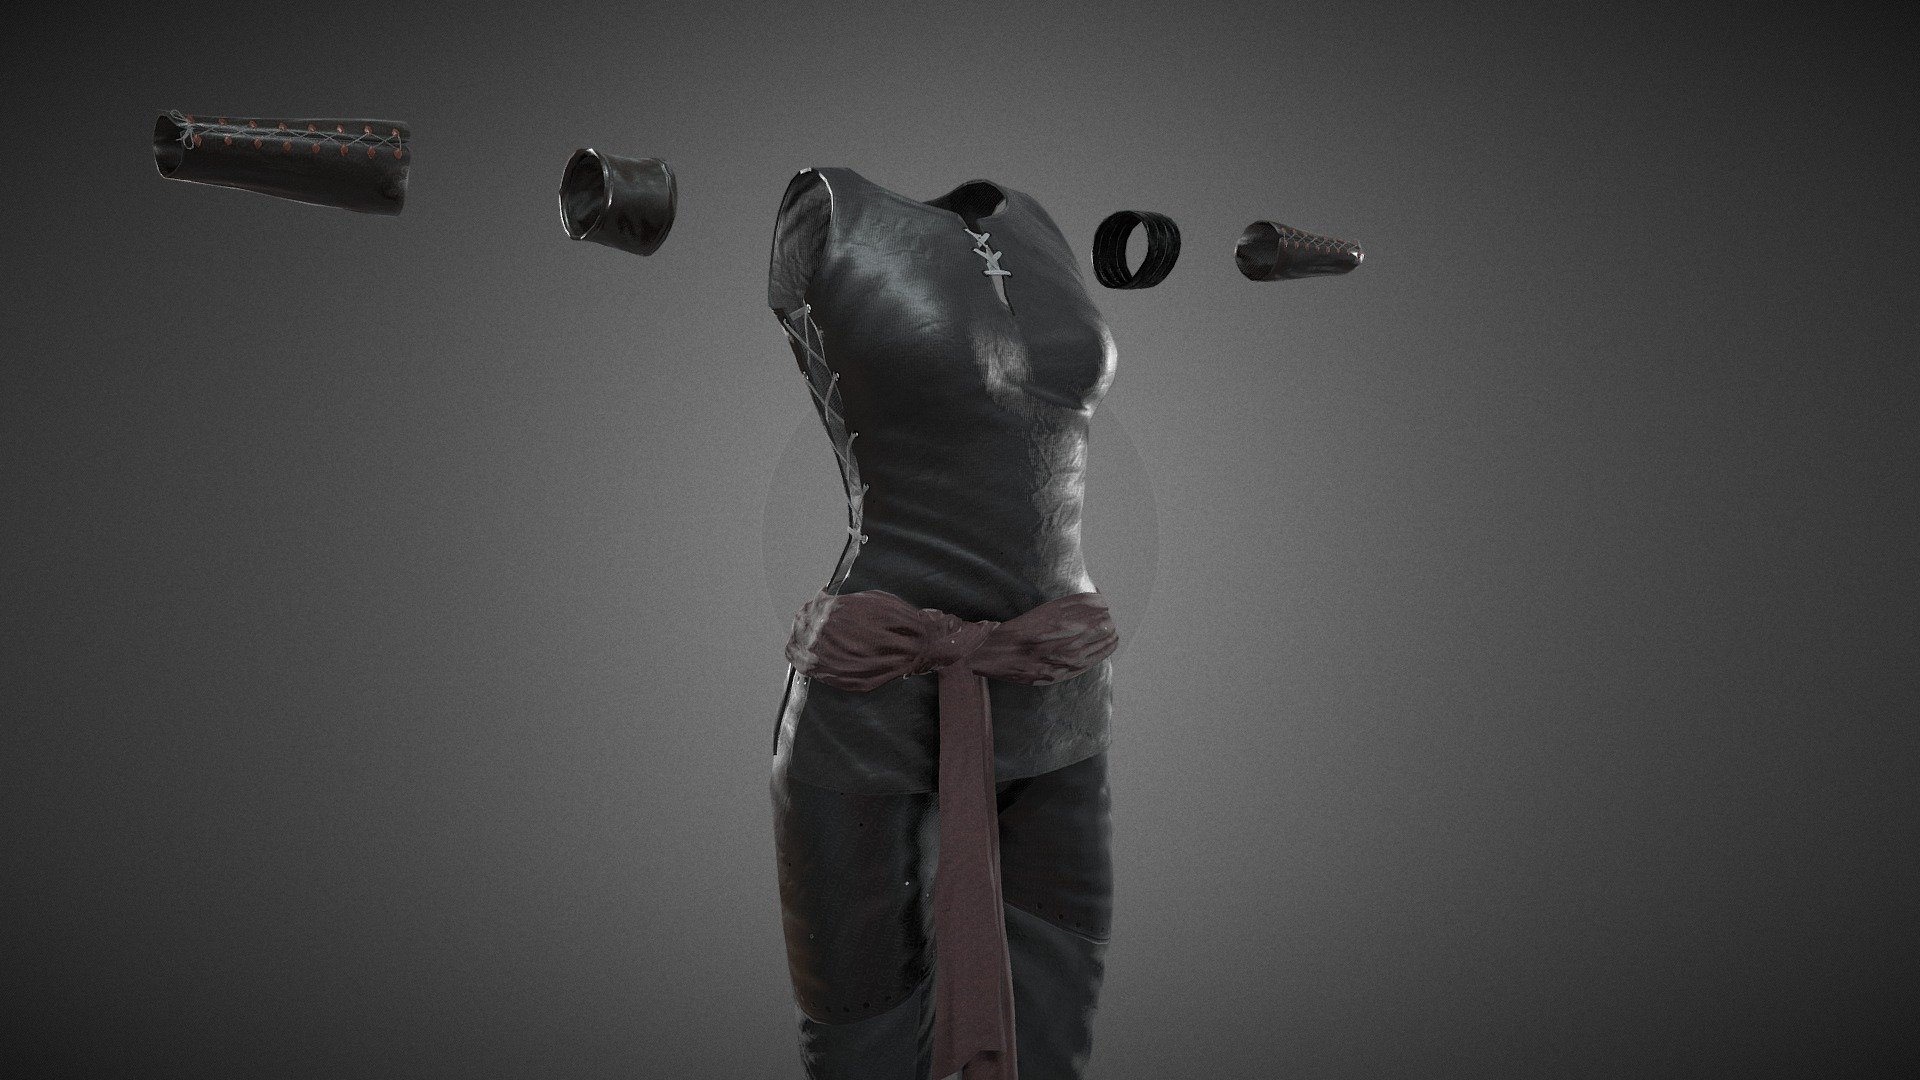 CG StudioX Present :
Female Ninja Outfit 1 Outfit lowpoly/PBR




This is Female Ninja Outfit 1 Comes with Specular and Metalness PBR.

The photo been rendered using Marmoset Toolbag 3 (real time game engine )


Features :



Comes with Specular and Metalness PBR 4K texture .

Good topology.

Low polygon geometry.

The Model is prefect for game for both Specular workflow as in Unity and Metalness as in Unreal engine .

The model also rendered using Marmoset Toolbag 3 with both Specular and Metalness PBR and also included in the product with the full texture.

The product has ID map in every part for changing any part in the model .

The texture can be easily adjustable .


Texture :



ALL Texture [Albedo -Normal-Metalness -Roughness-Gloss-Specular-ID-AO] (4096*4096)

Three objects (Top-Pants-Boots) each one has it own UV set and textures.


Files :
Marmoset Toolbag 3 ,Maya,,FBX,OBj with all the textures.




Contact me for if you have any questions.
 - Female Ninja Outfit 1 - Buy Royalty Free 3D model by CG StudioX (@CG_StudioX) 3d model